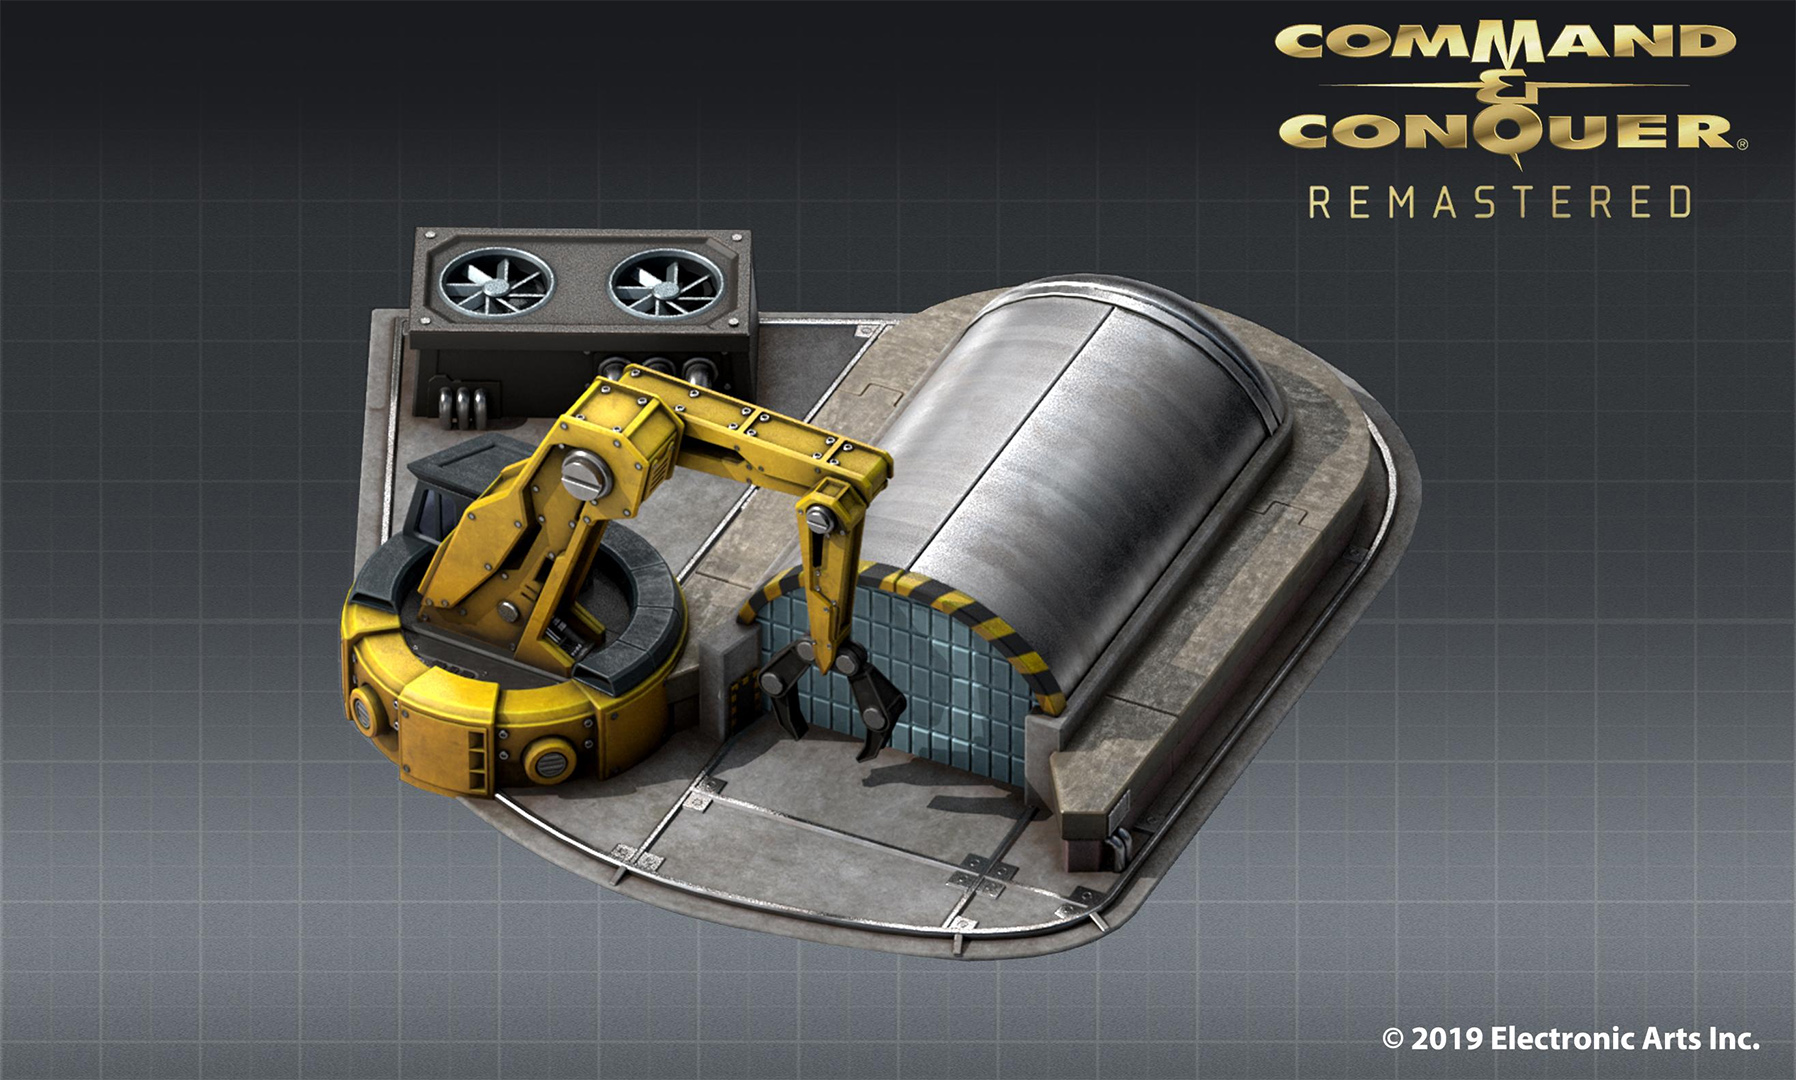 Here’s the Construction Yard from Command & Conquer: Remastered